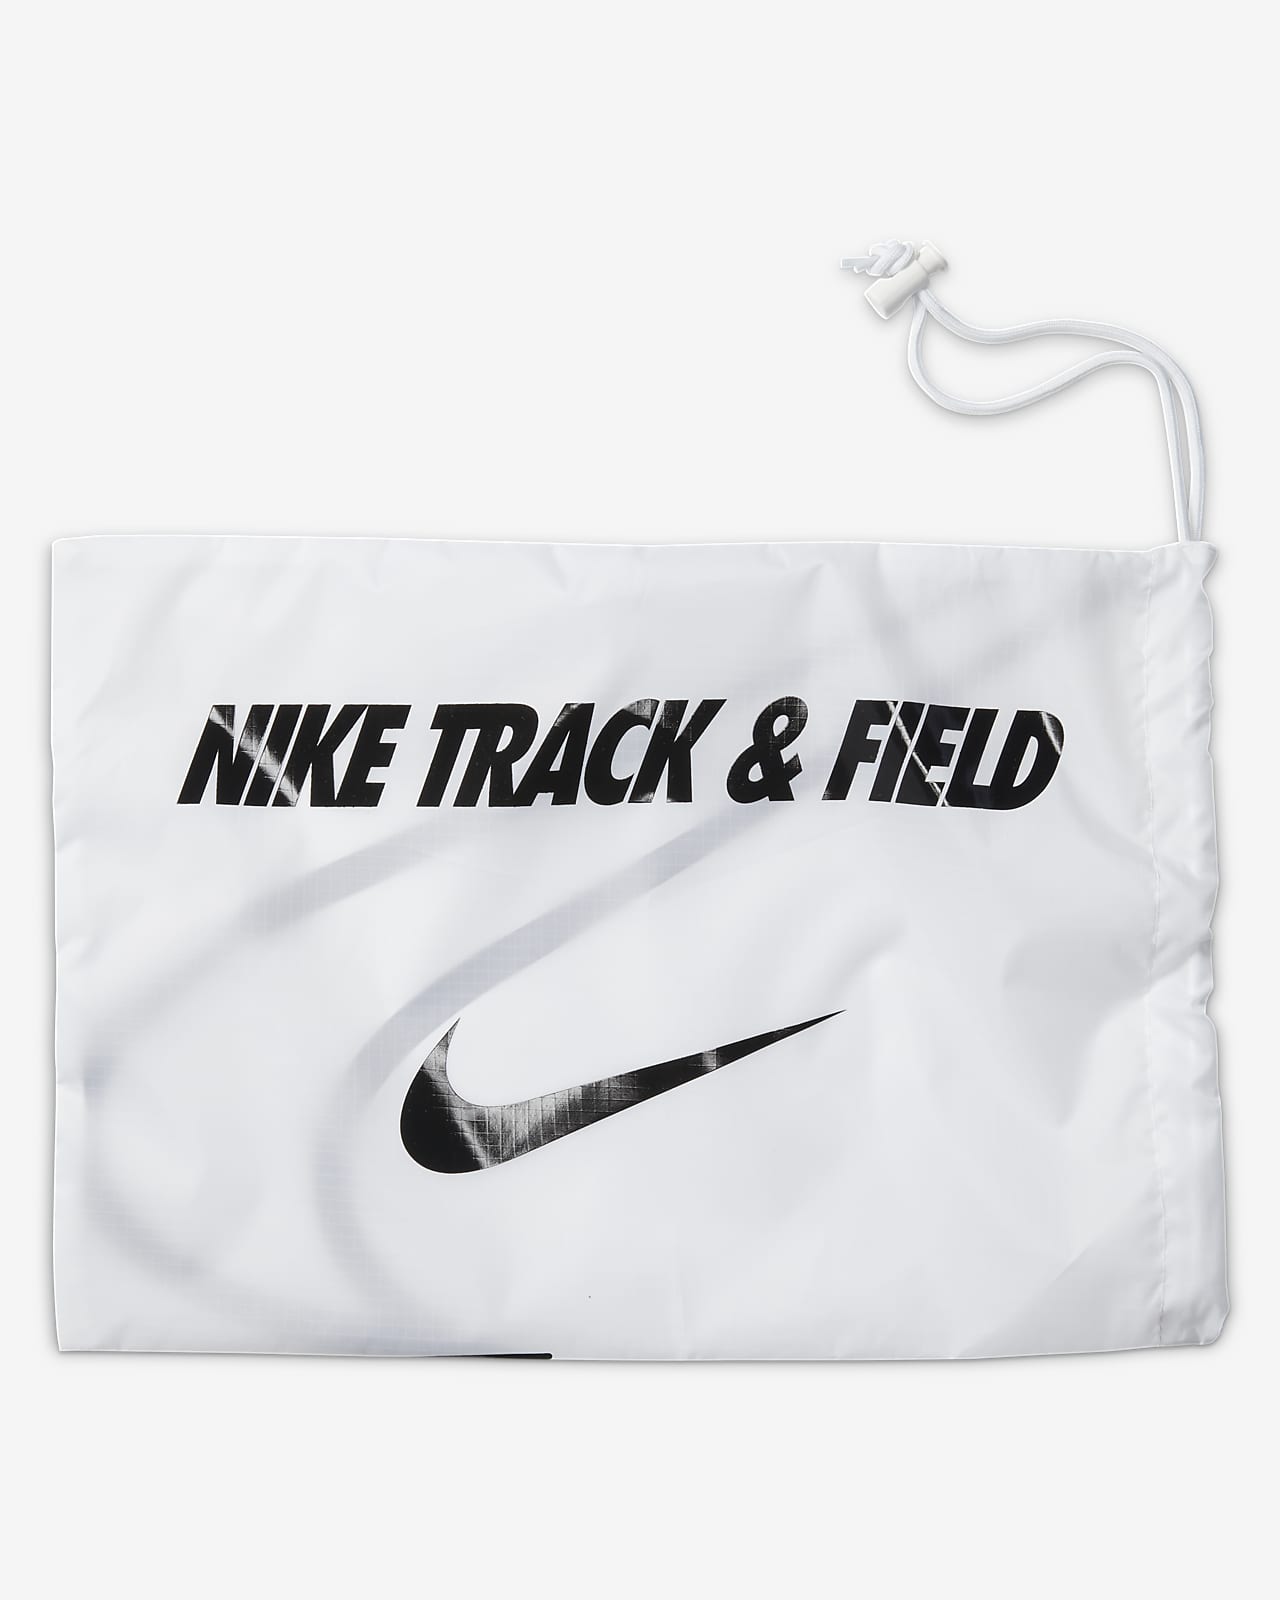 THROWER Bags - Javelin, Discus, Shotput - Track And Field - Bags